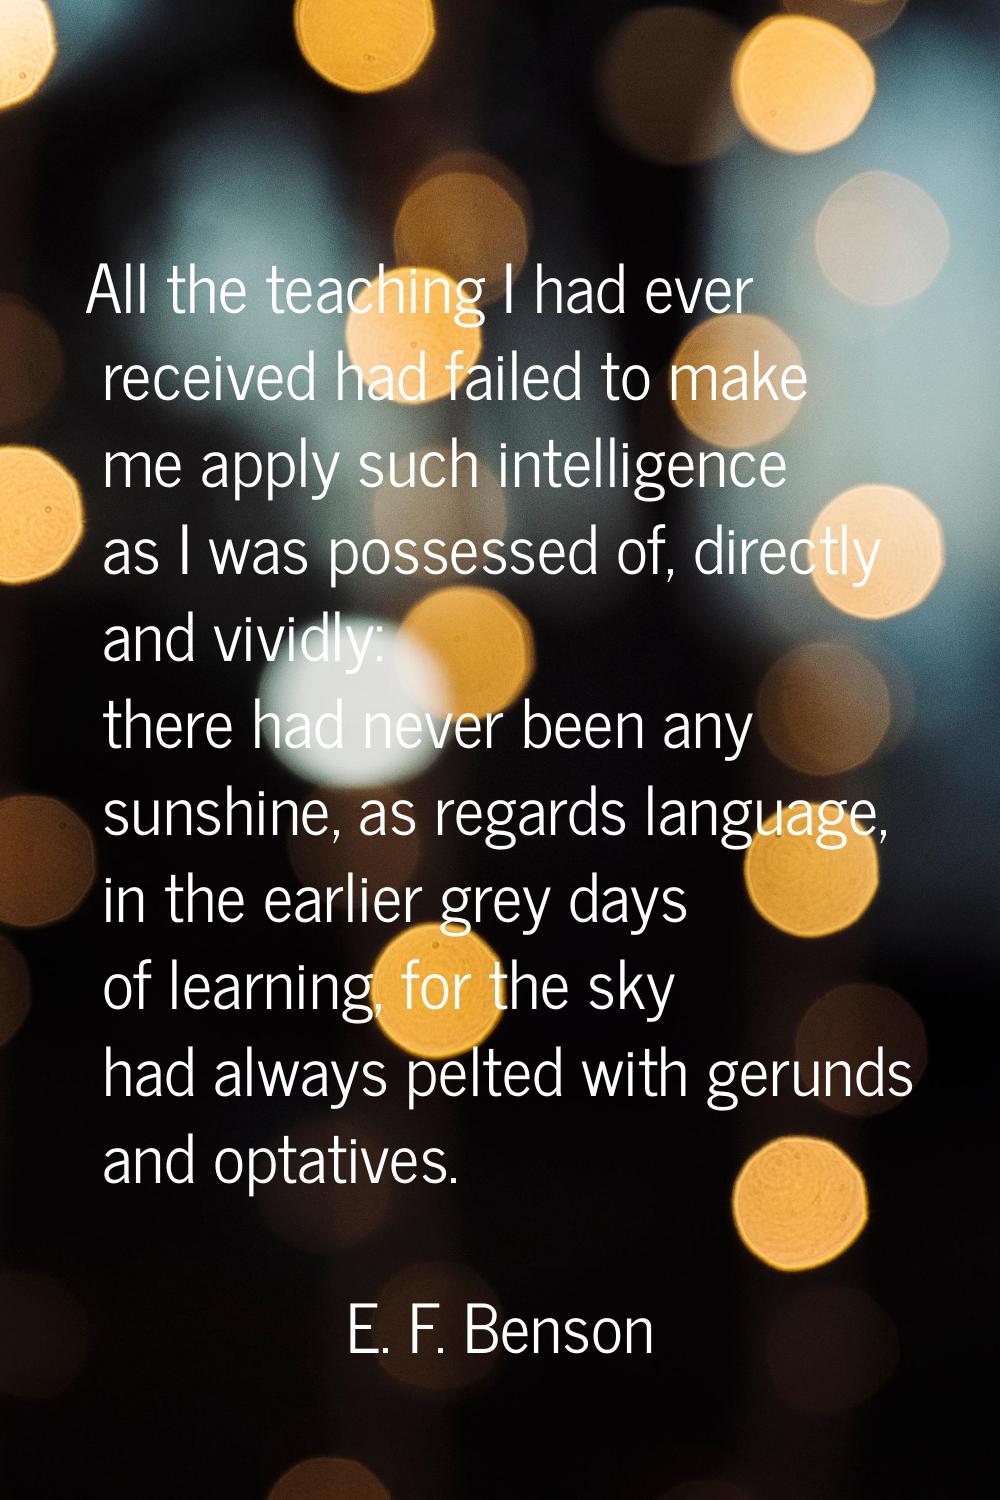 All the teaching I had ever received had failed to make me apply such intelligence as I was possess